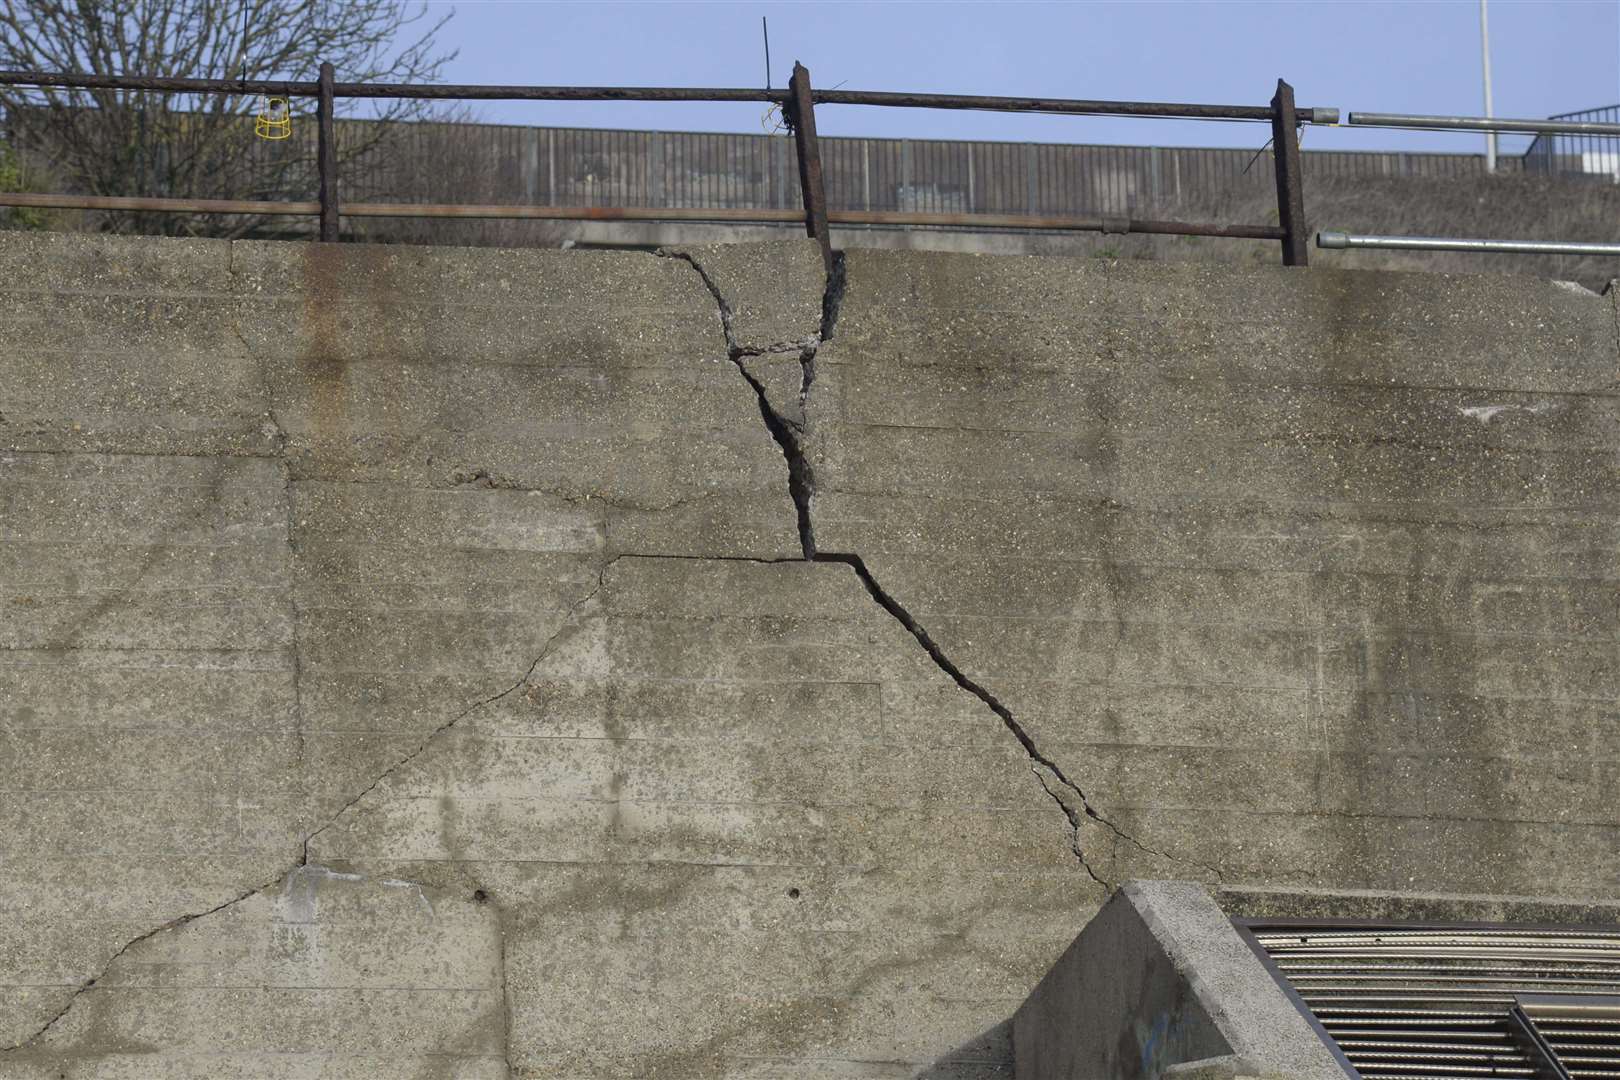 The deep cracks that appeared in the sea wall